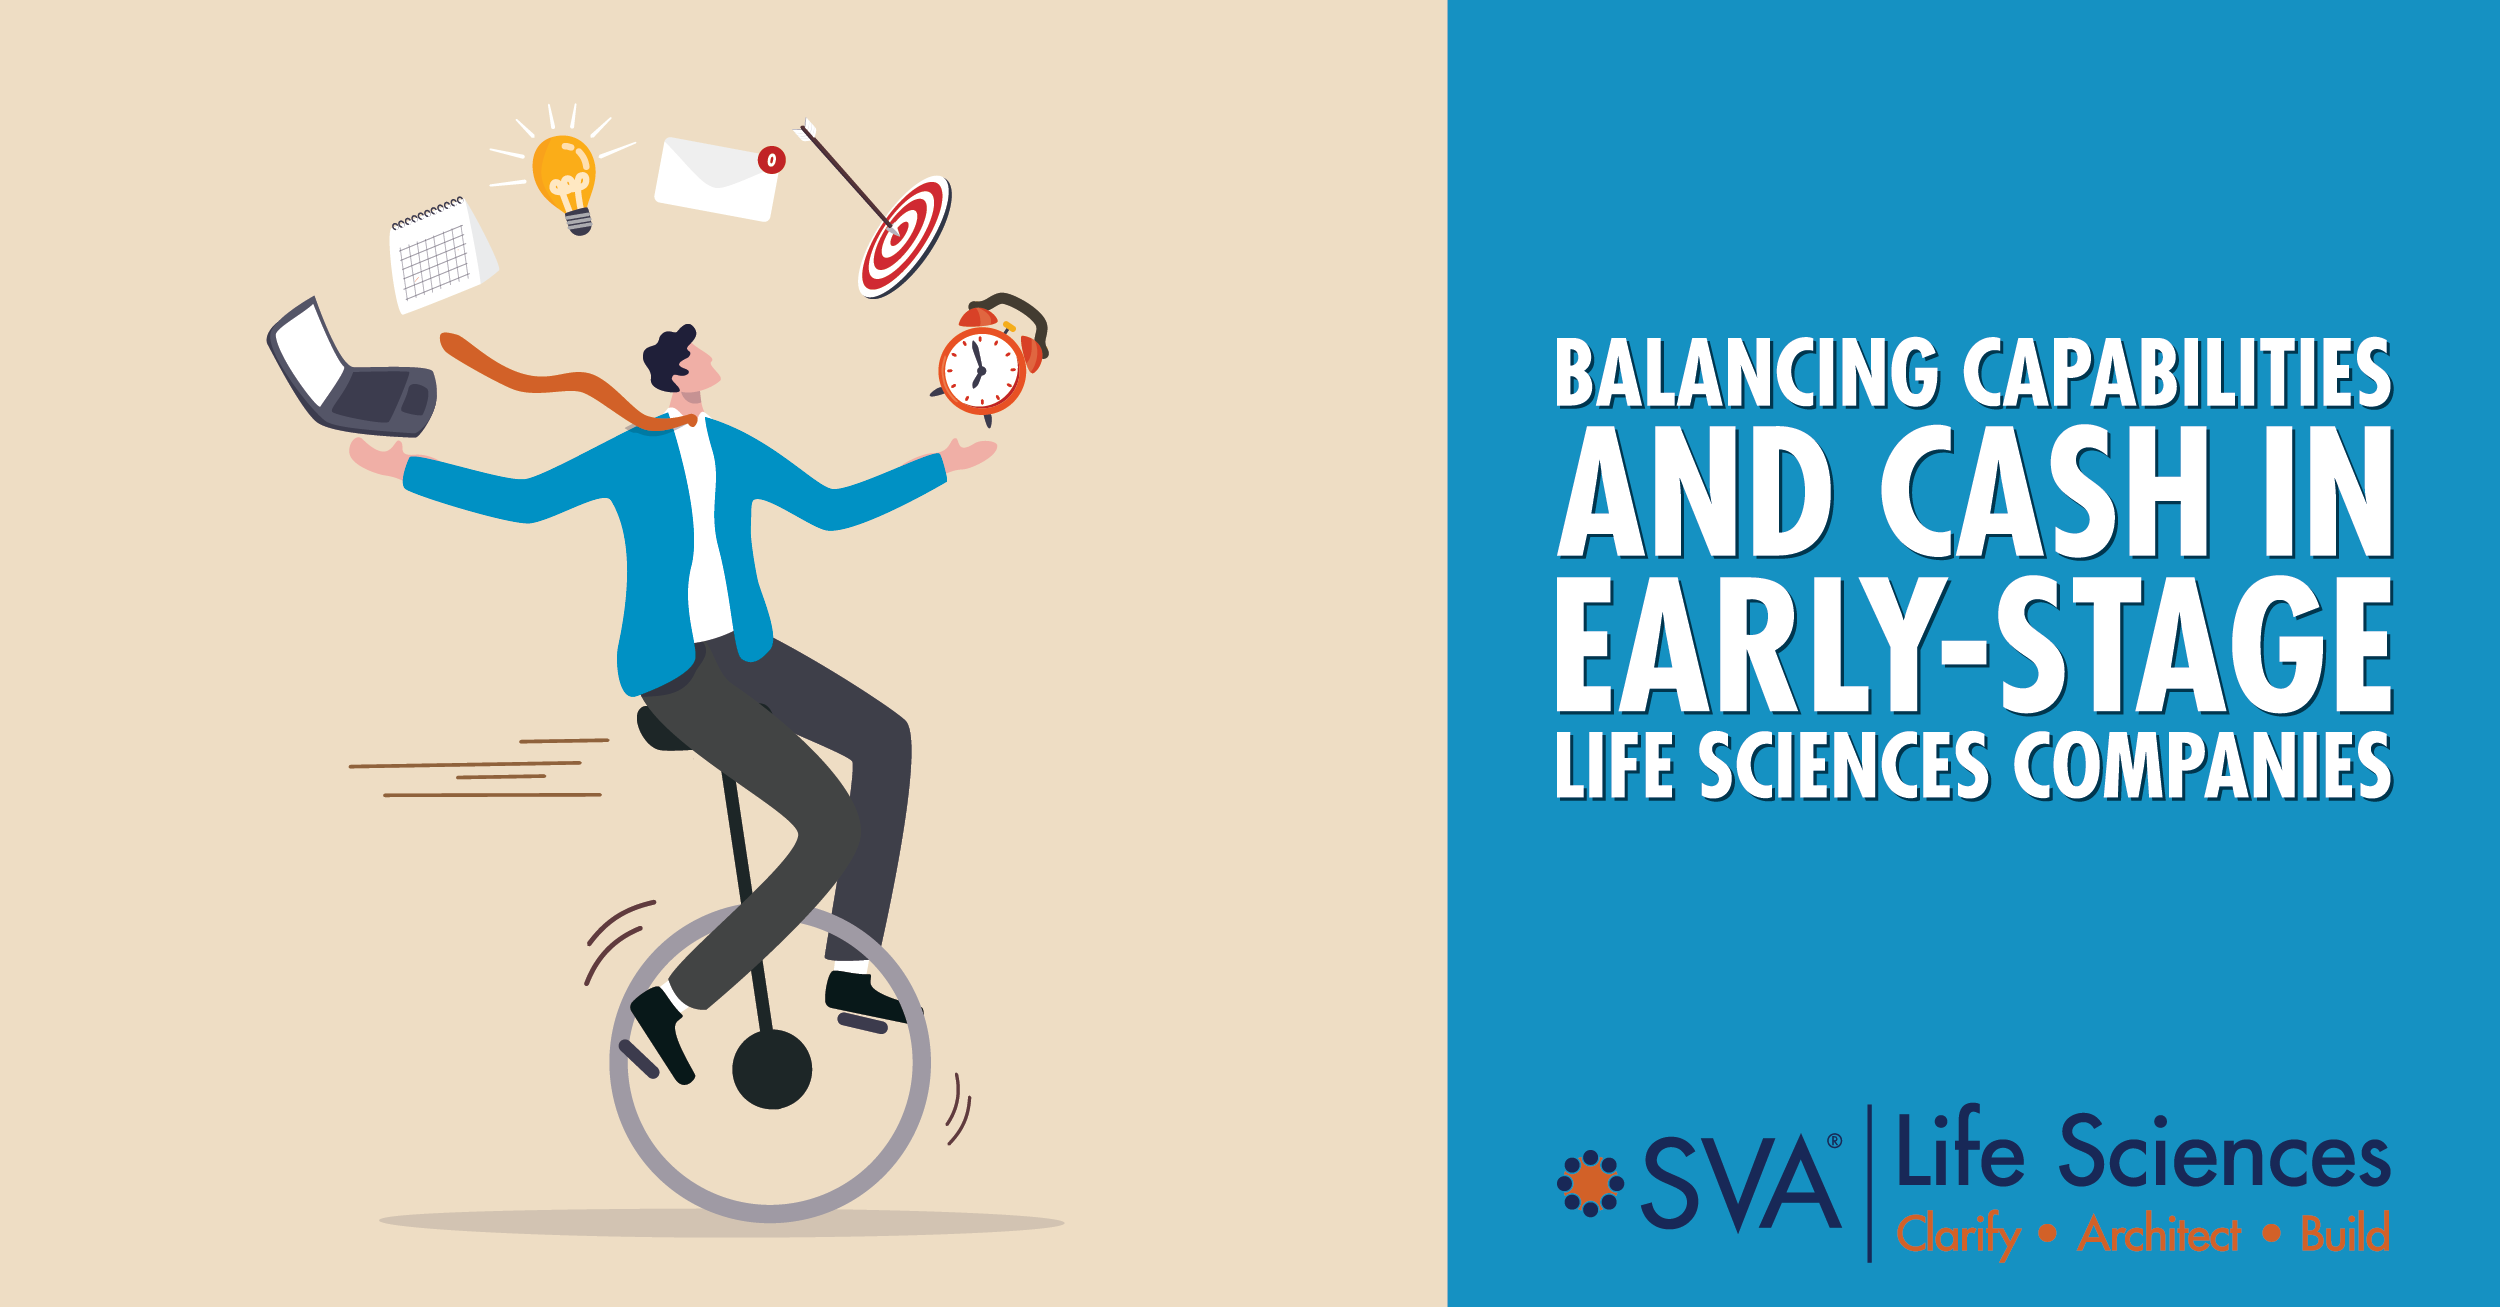 Balancing Capabilities and Cash in Early-Stage Life Sciences Companies